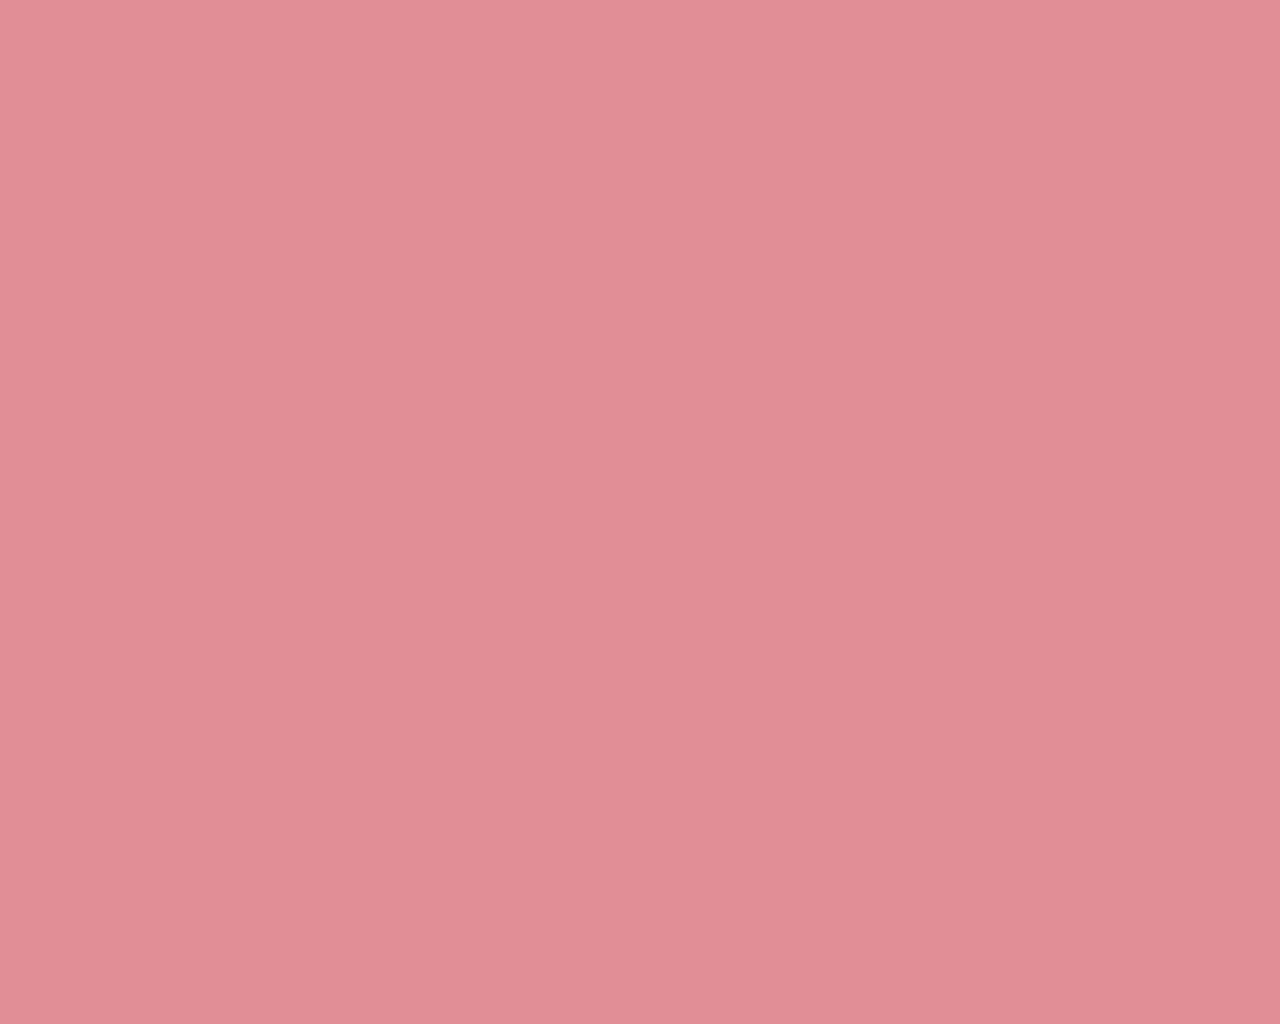 1280x1024 Ruddy Pink Solid Color Background